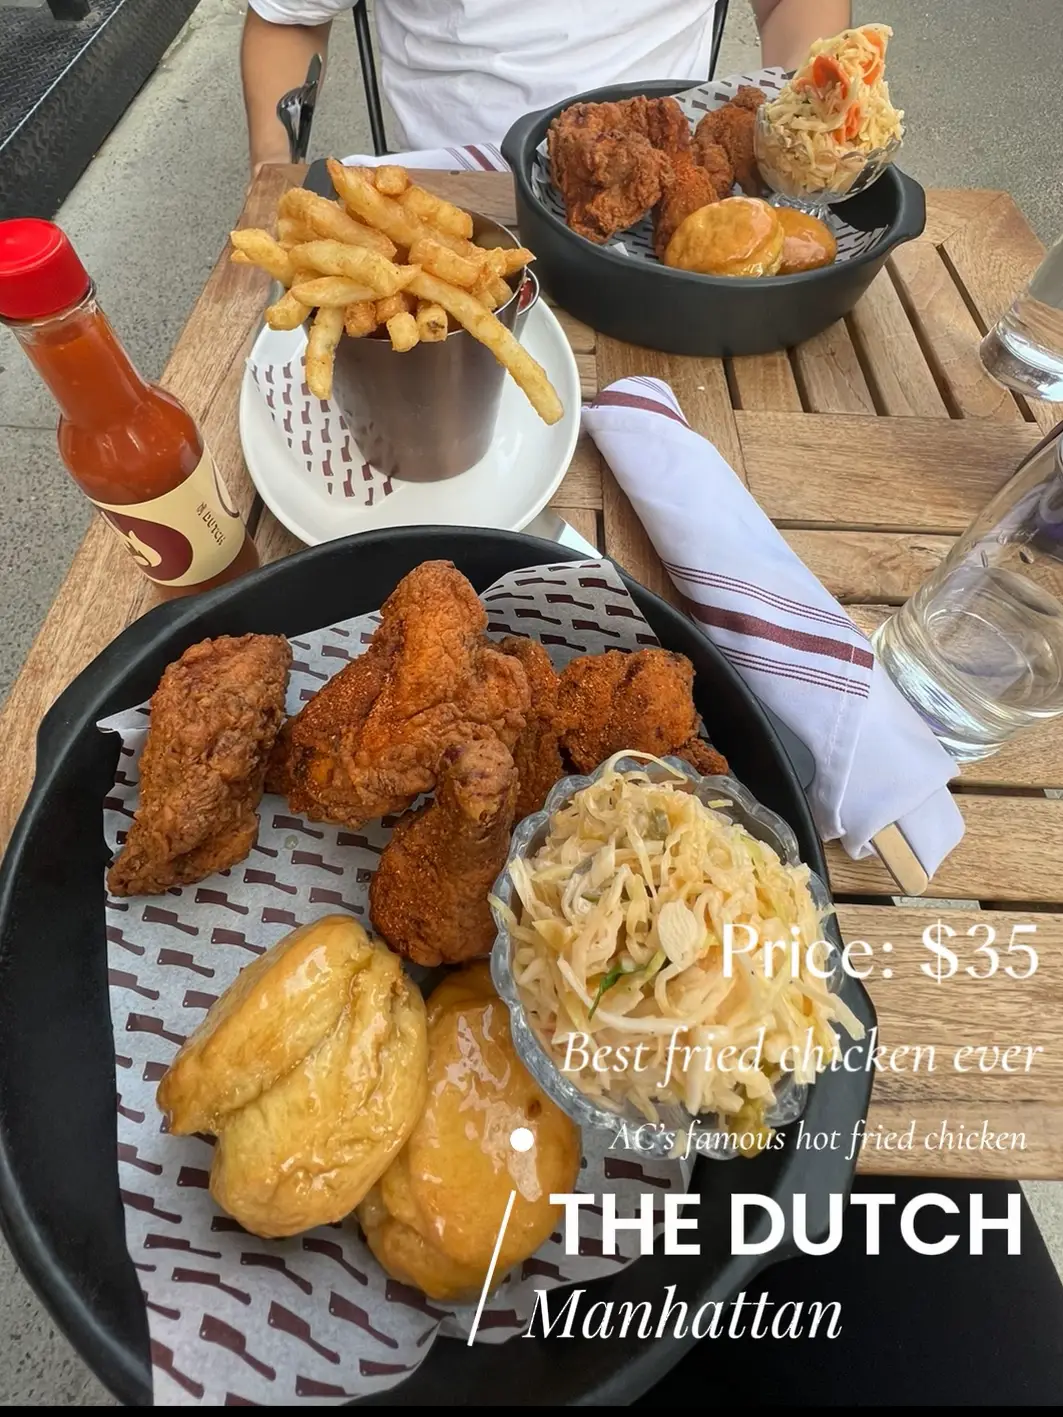  A basket of fried chicken with a price of $35.